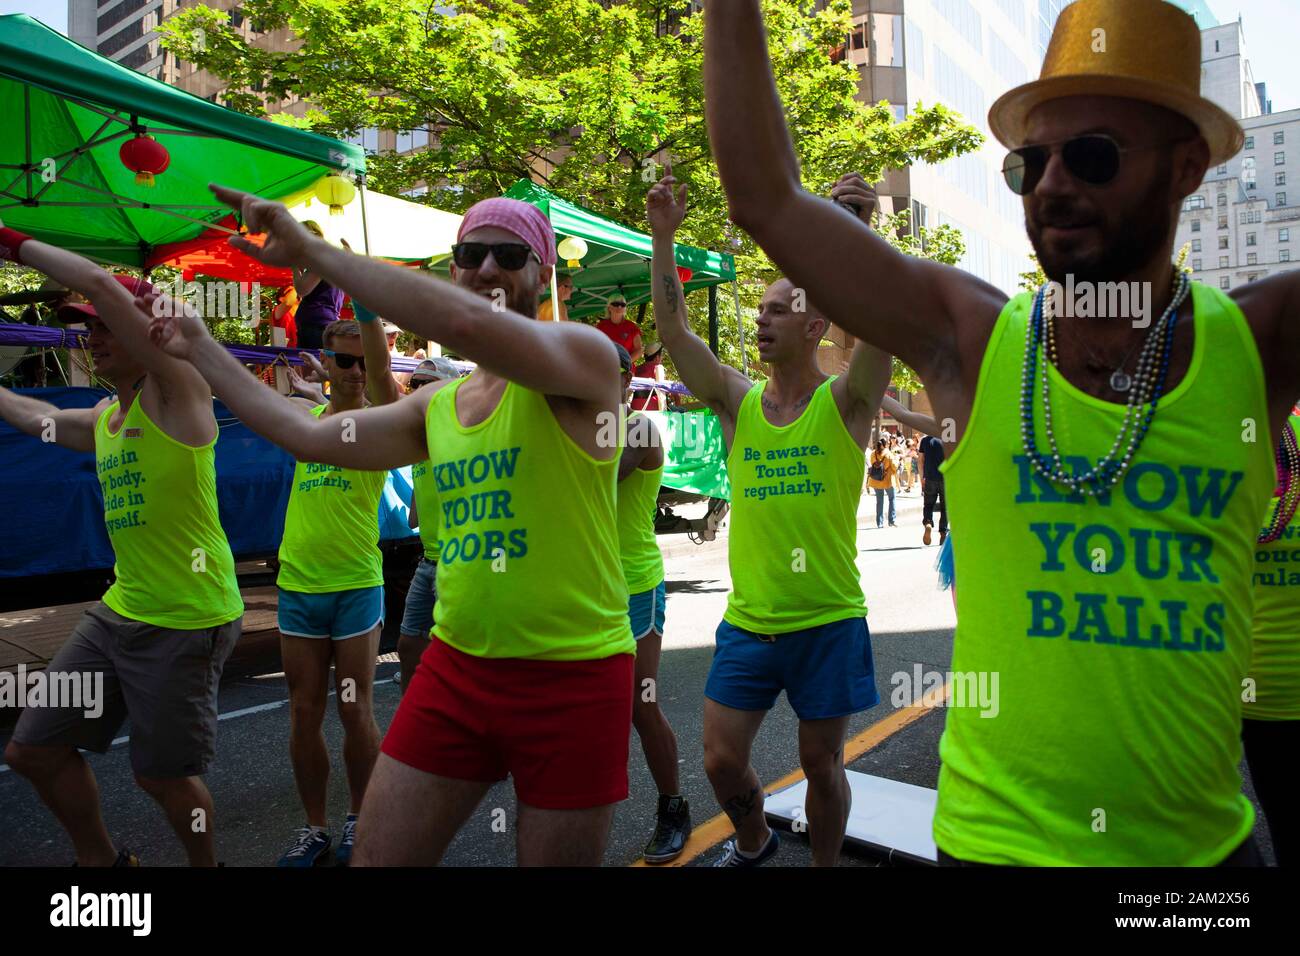 Dance troupe performing at Pride parade, Vancouver Pride Festival 2014, Vancouver, Canada Stock Photo